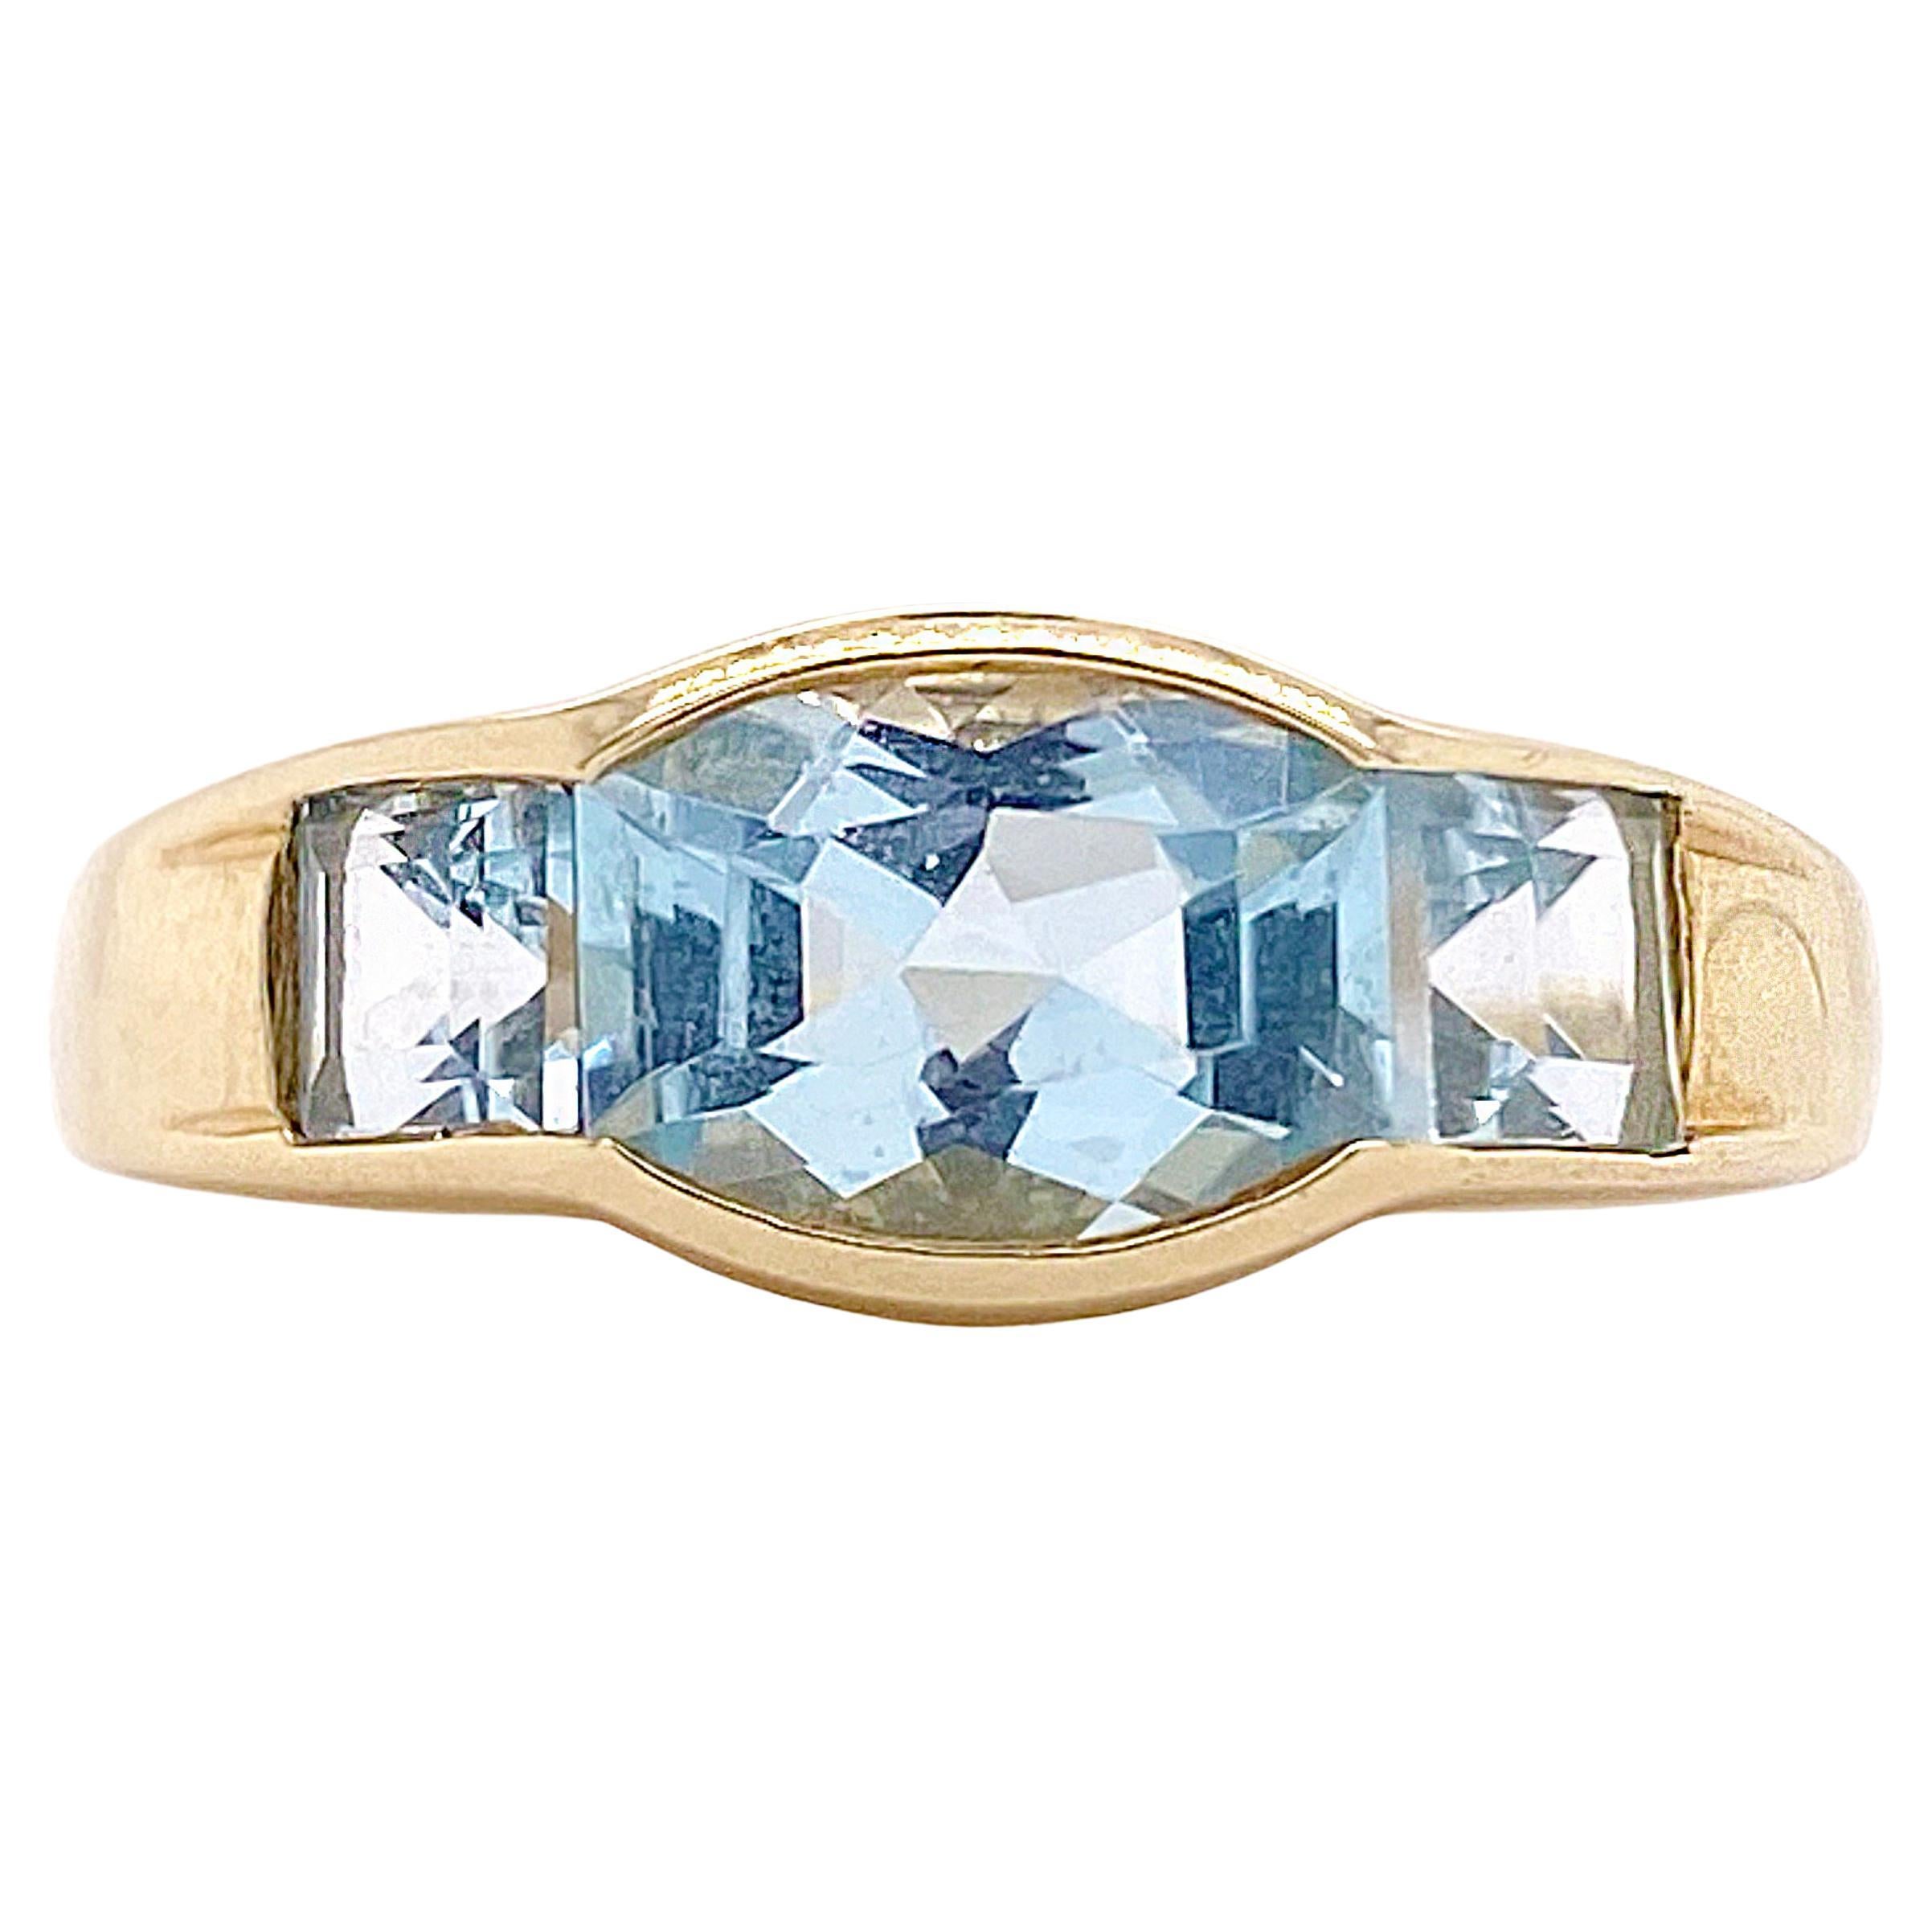 Blue Topaz Band Ring, 3 Stone Ring, Fancy Cut Genuine Blue Topaz in Yellow Gold